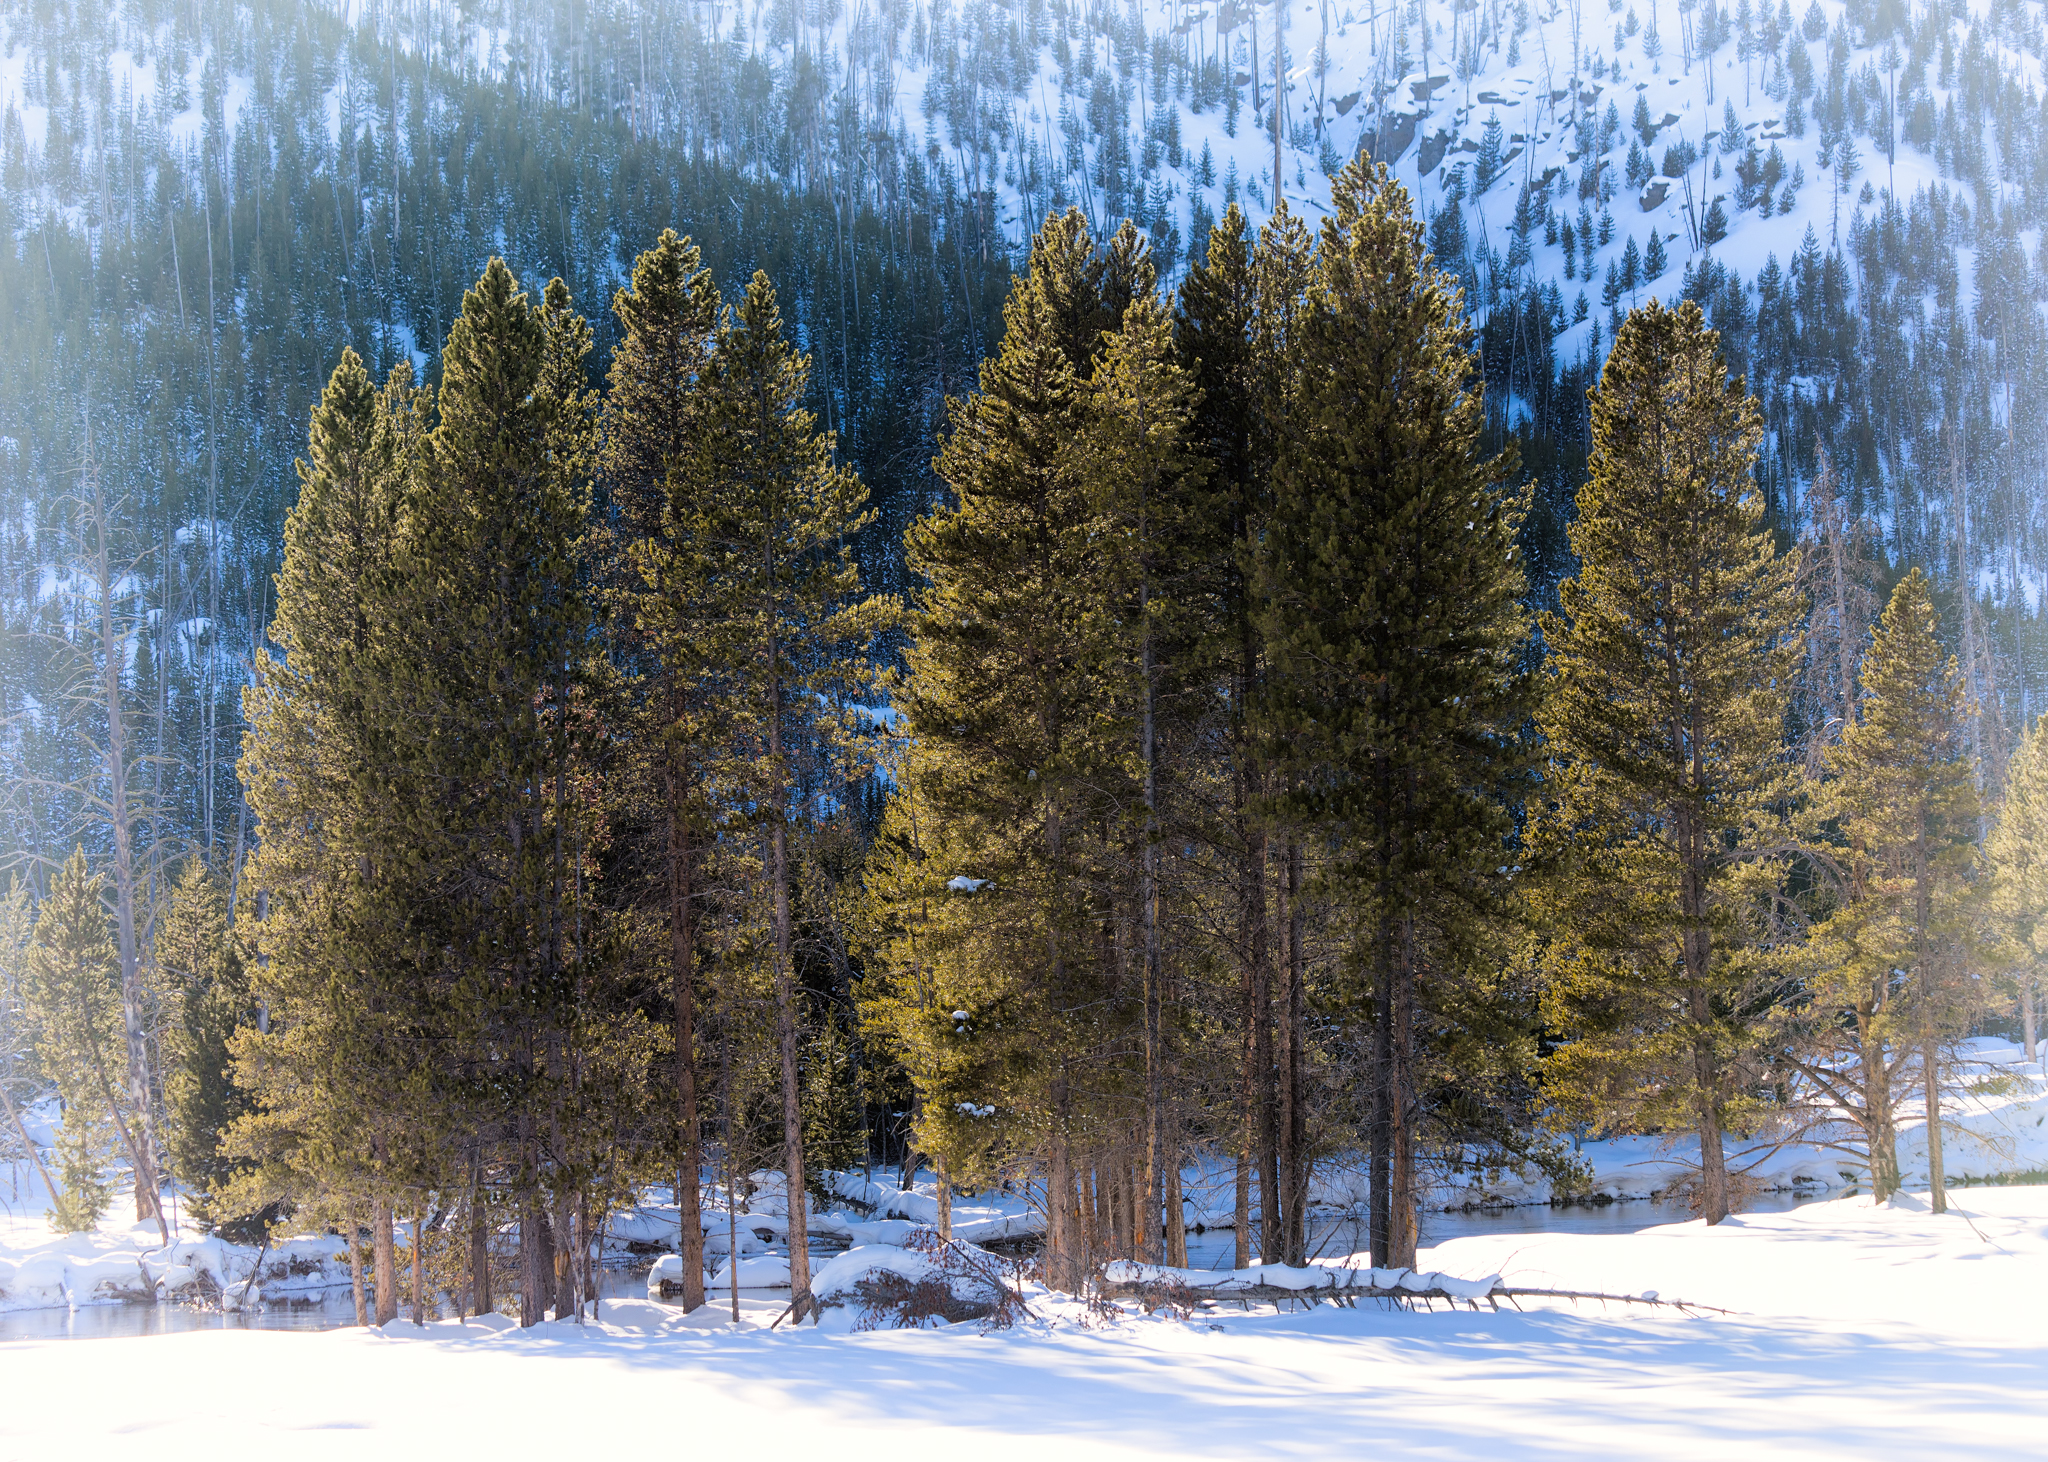 Trees in Yellowstone - After Post-Processing